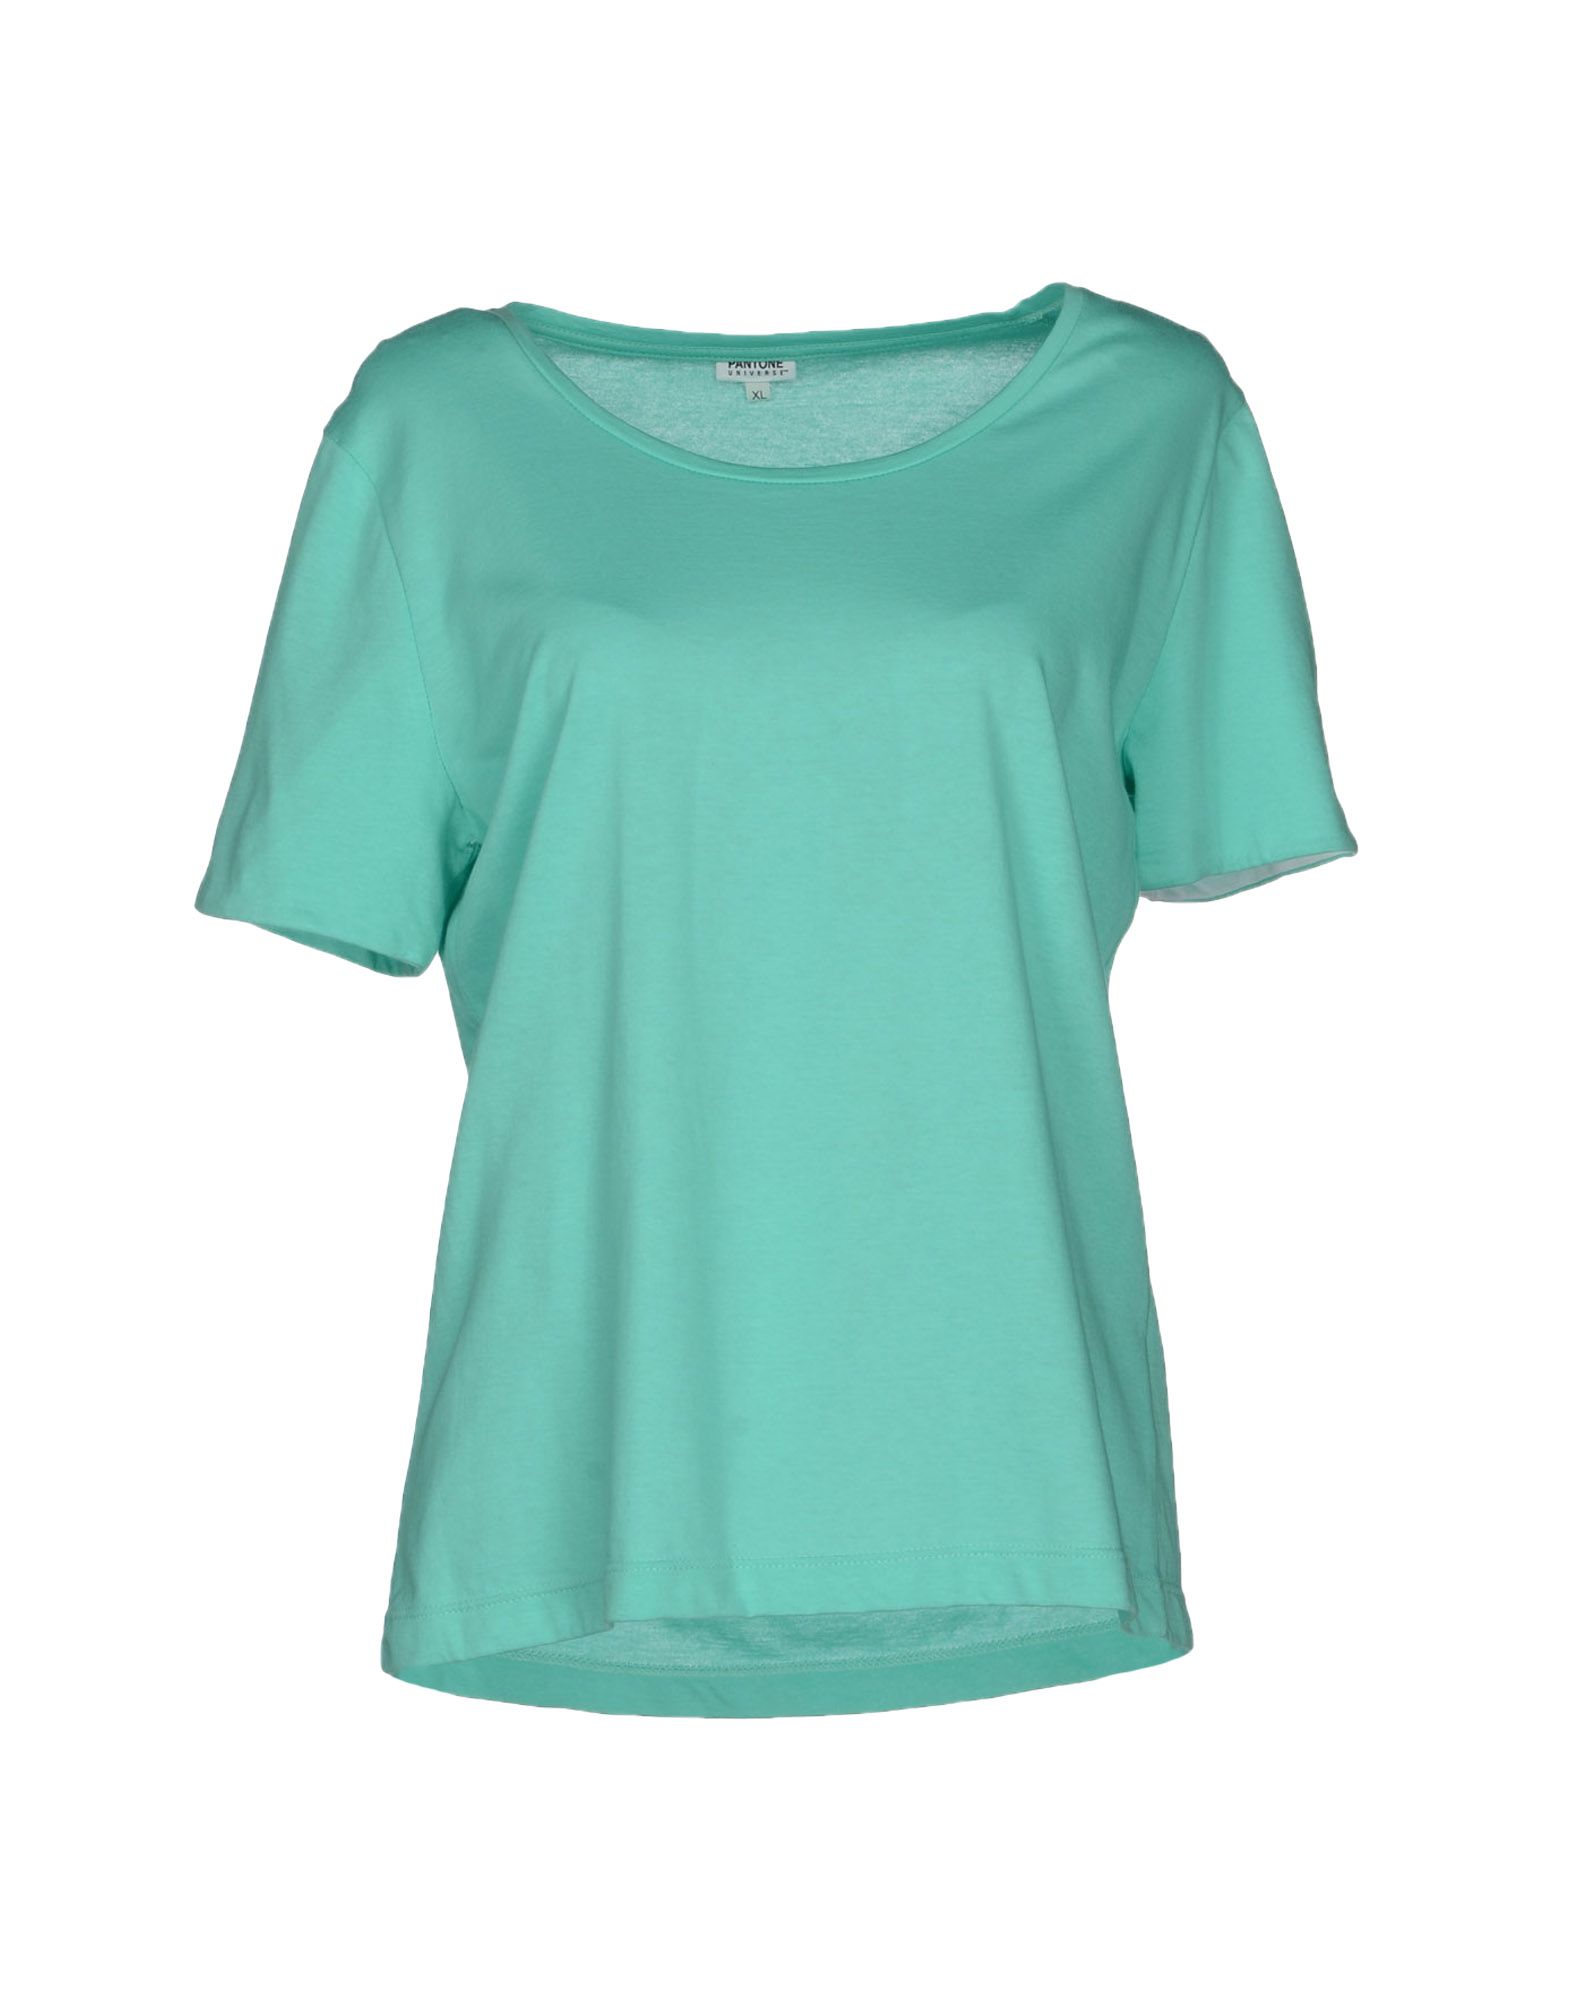 Pantone Short Sleeve T-shirt in Blue (Turquoise) | Lyst